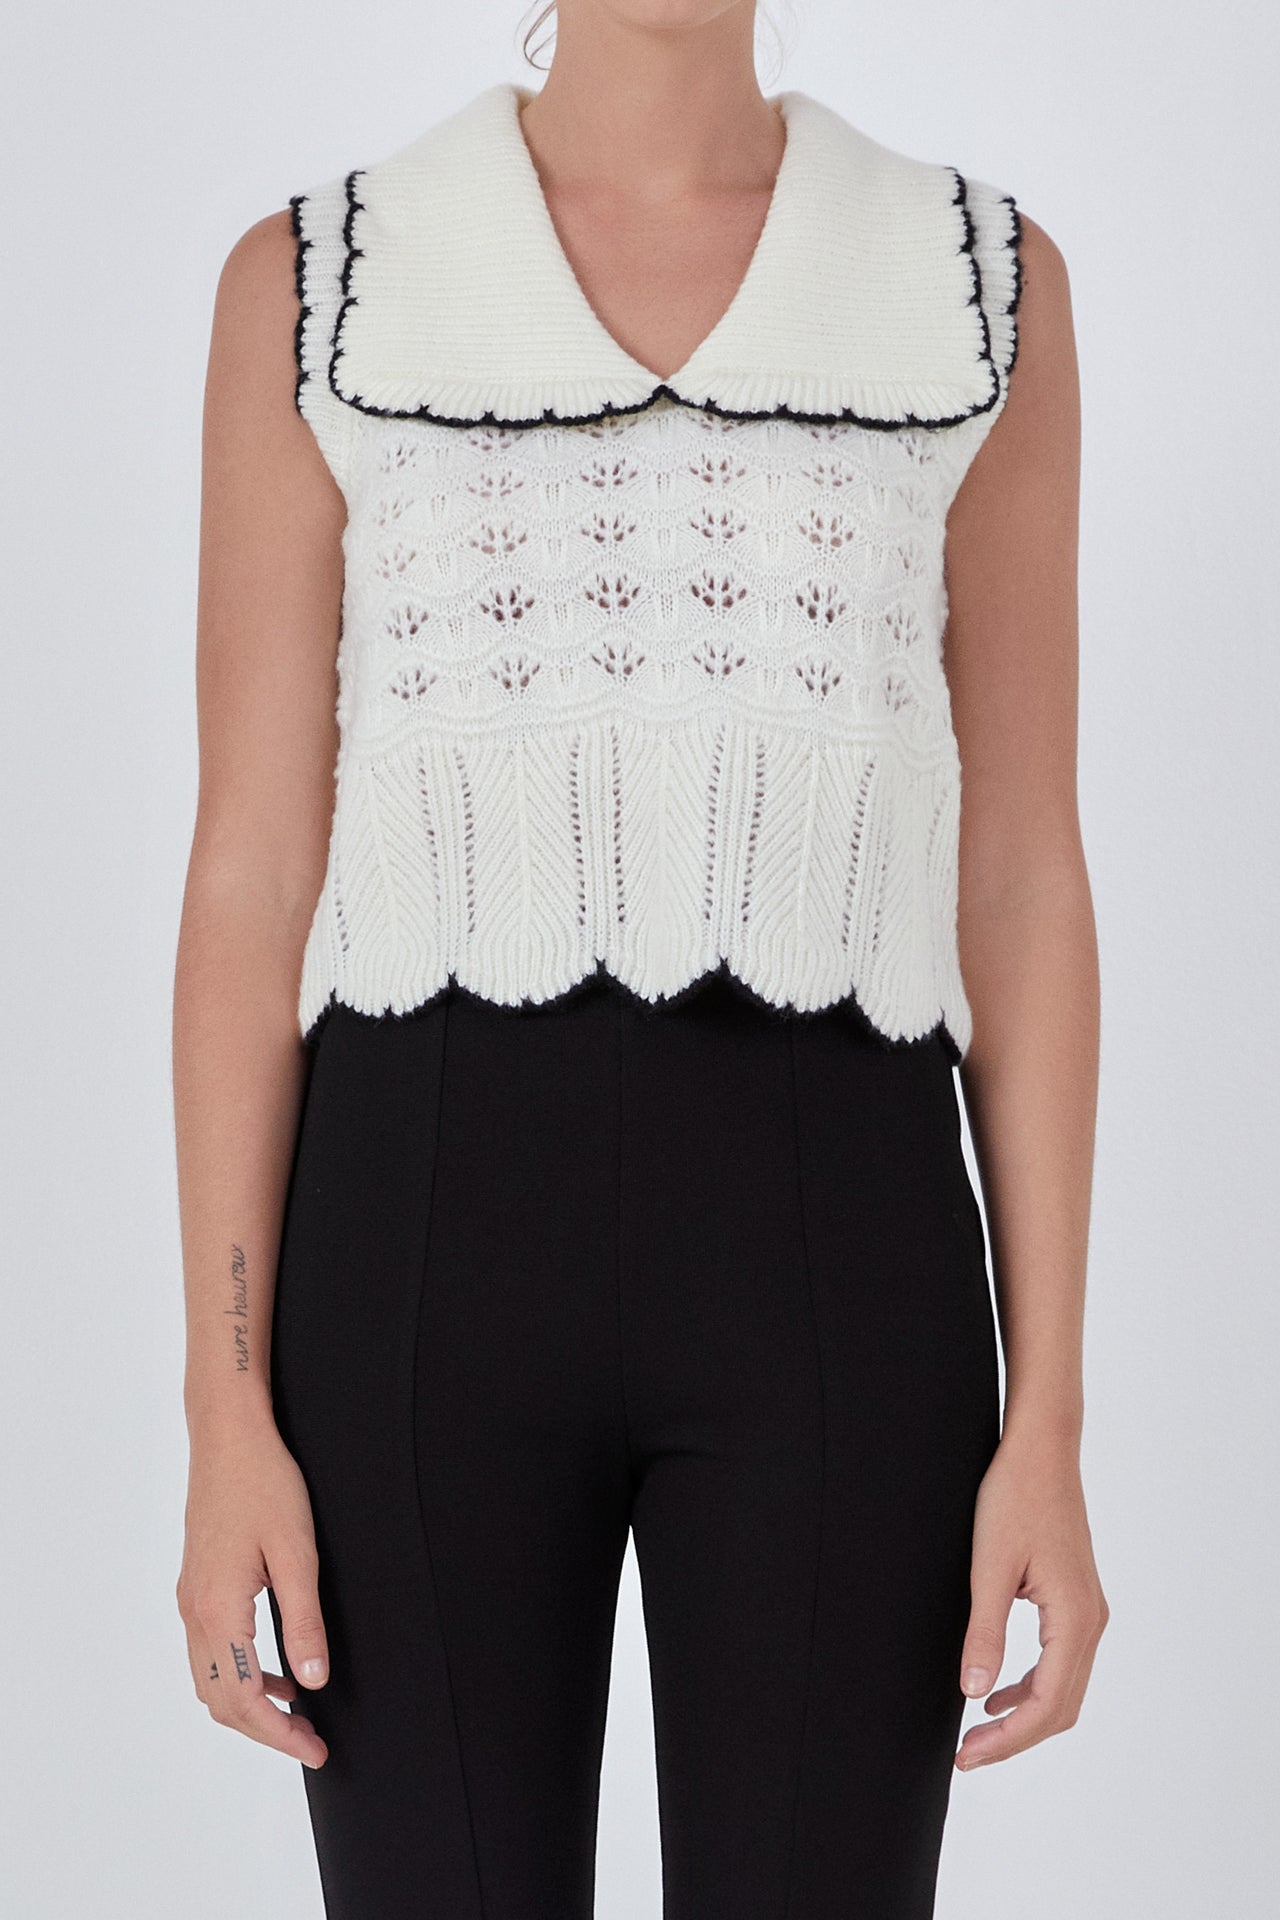 ENDLESS ROSE - Collared Crochet Vest - SWEATERS & KNITS available at Objectrare